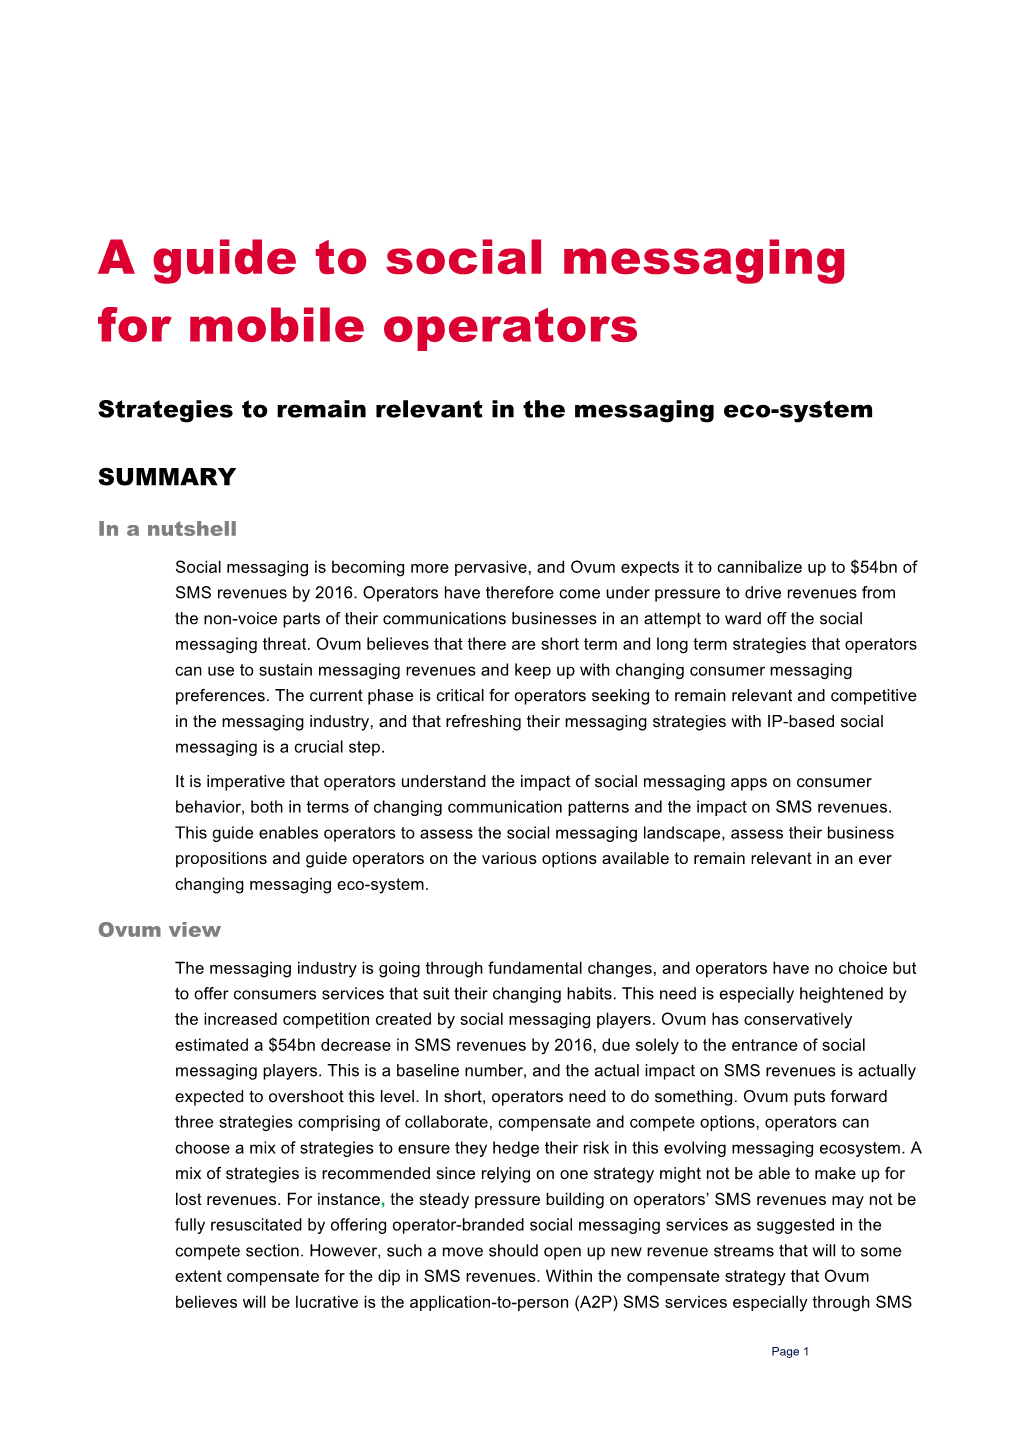 A Guide to Social Messaging for Mobile Operators